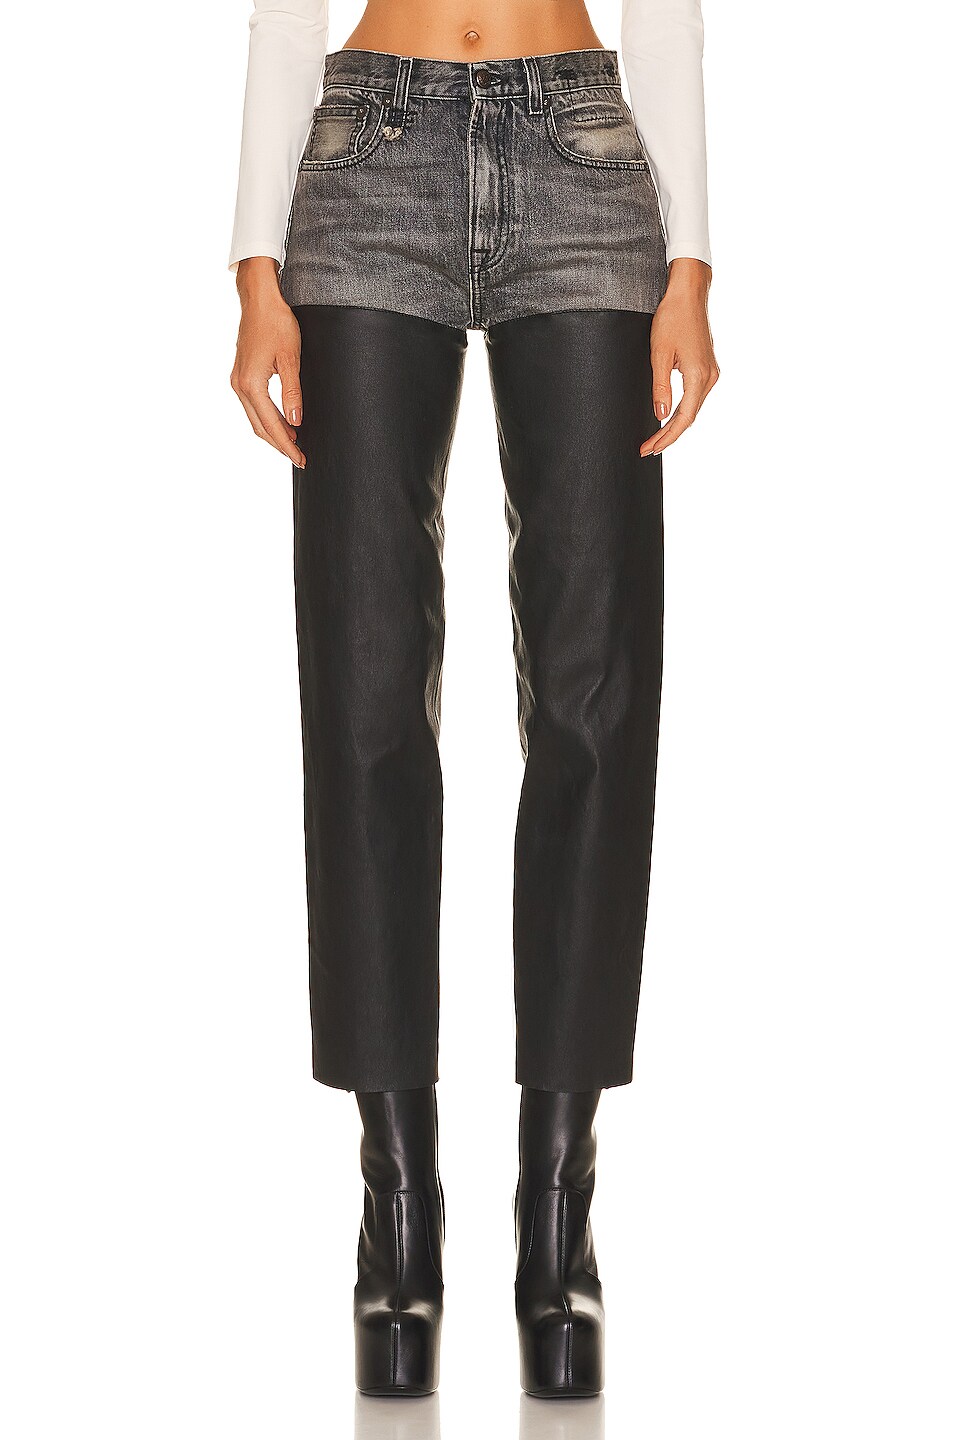 Image 1 of R13 Courtney Leather Chaps Pant in Leyton Black